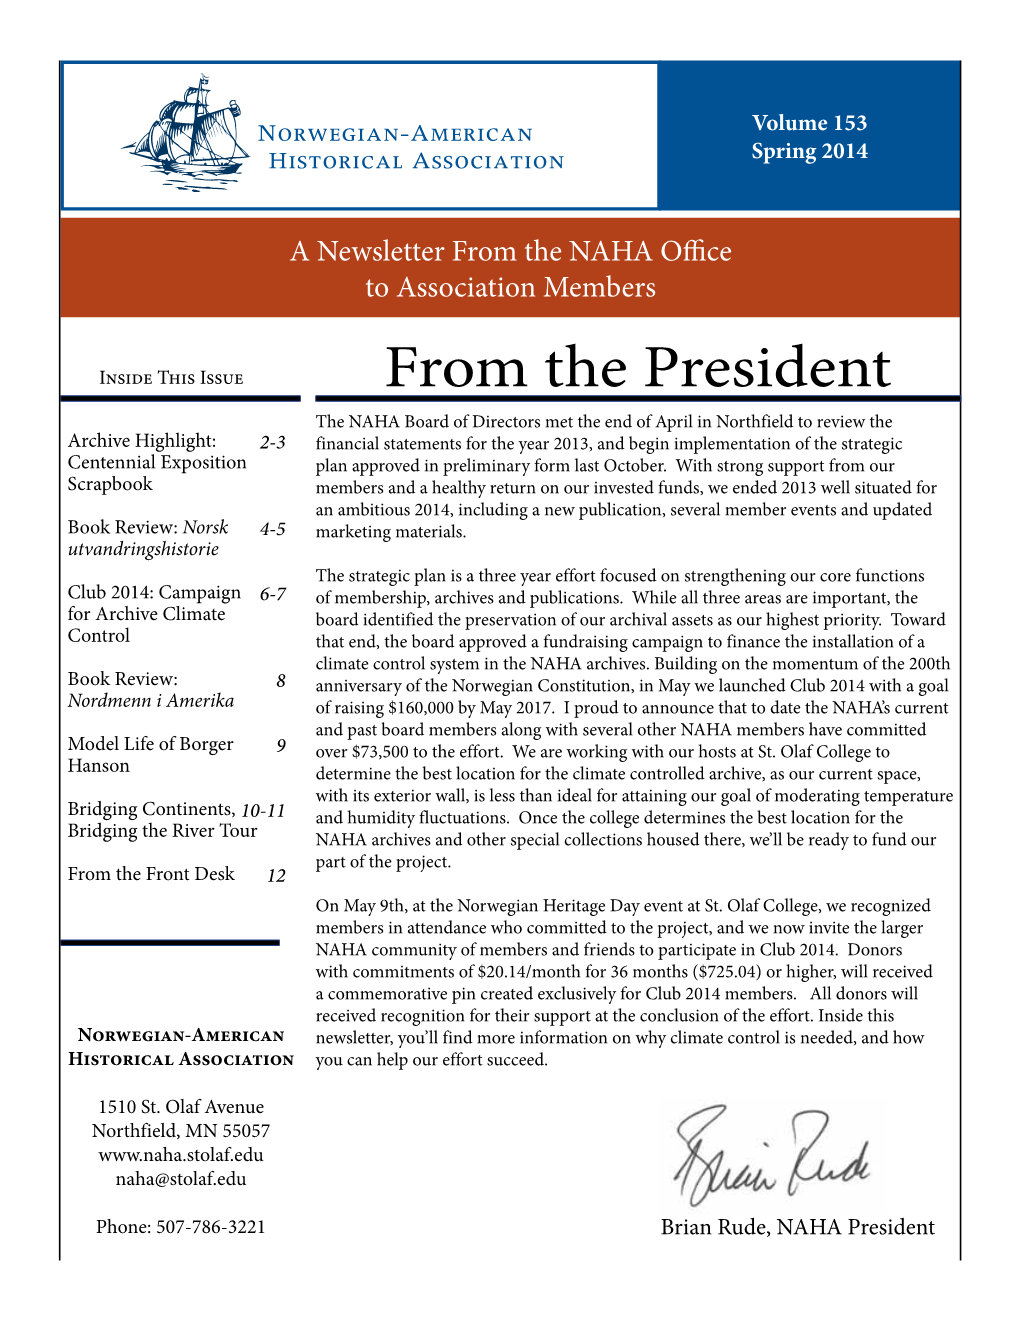 From the President